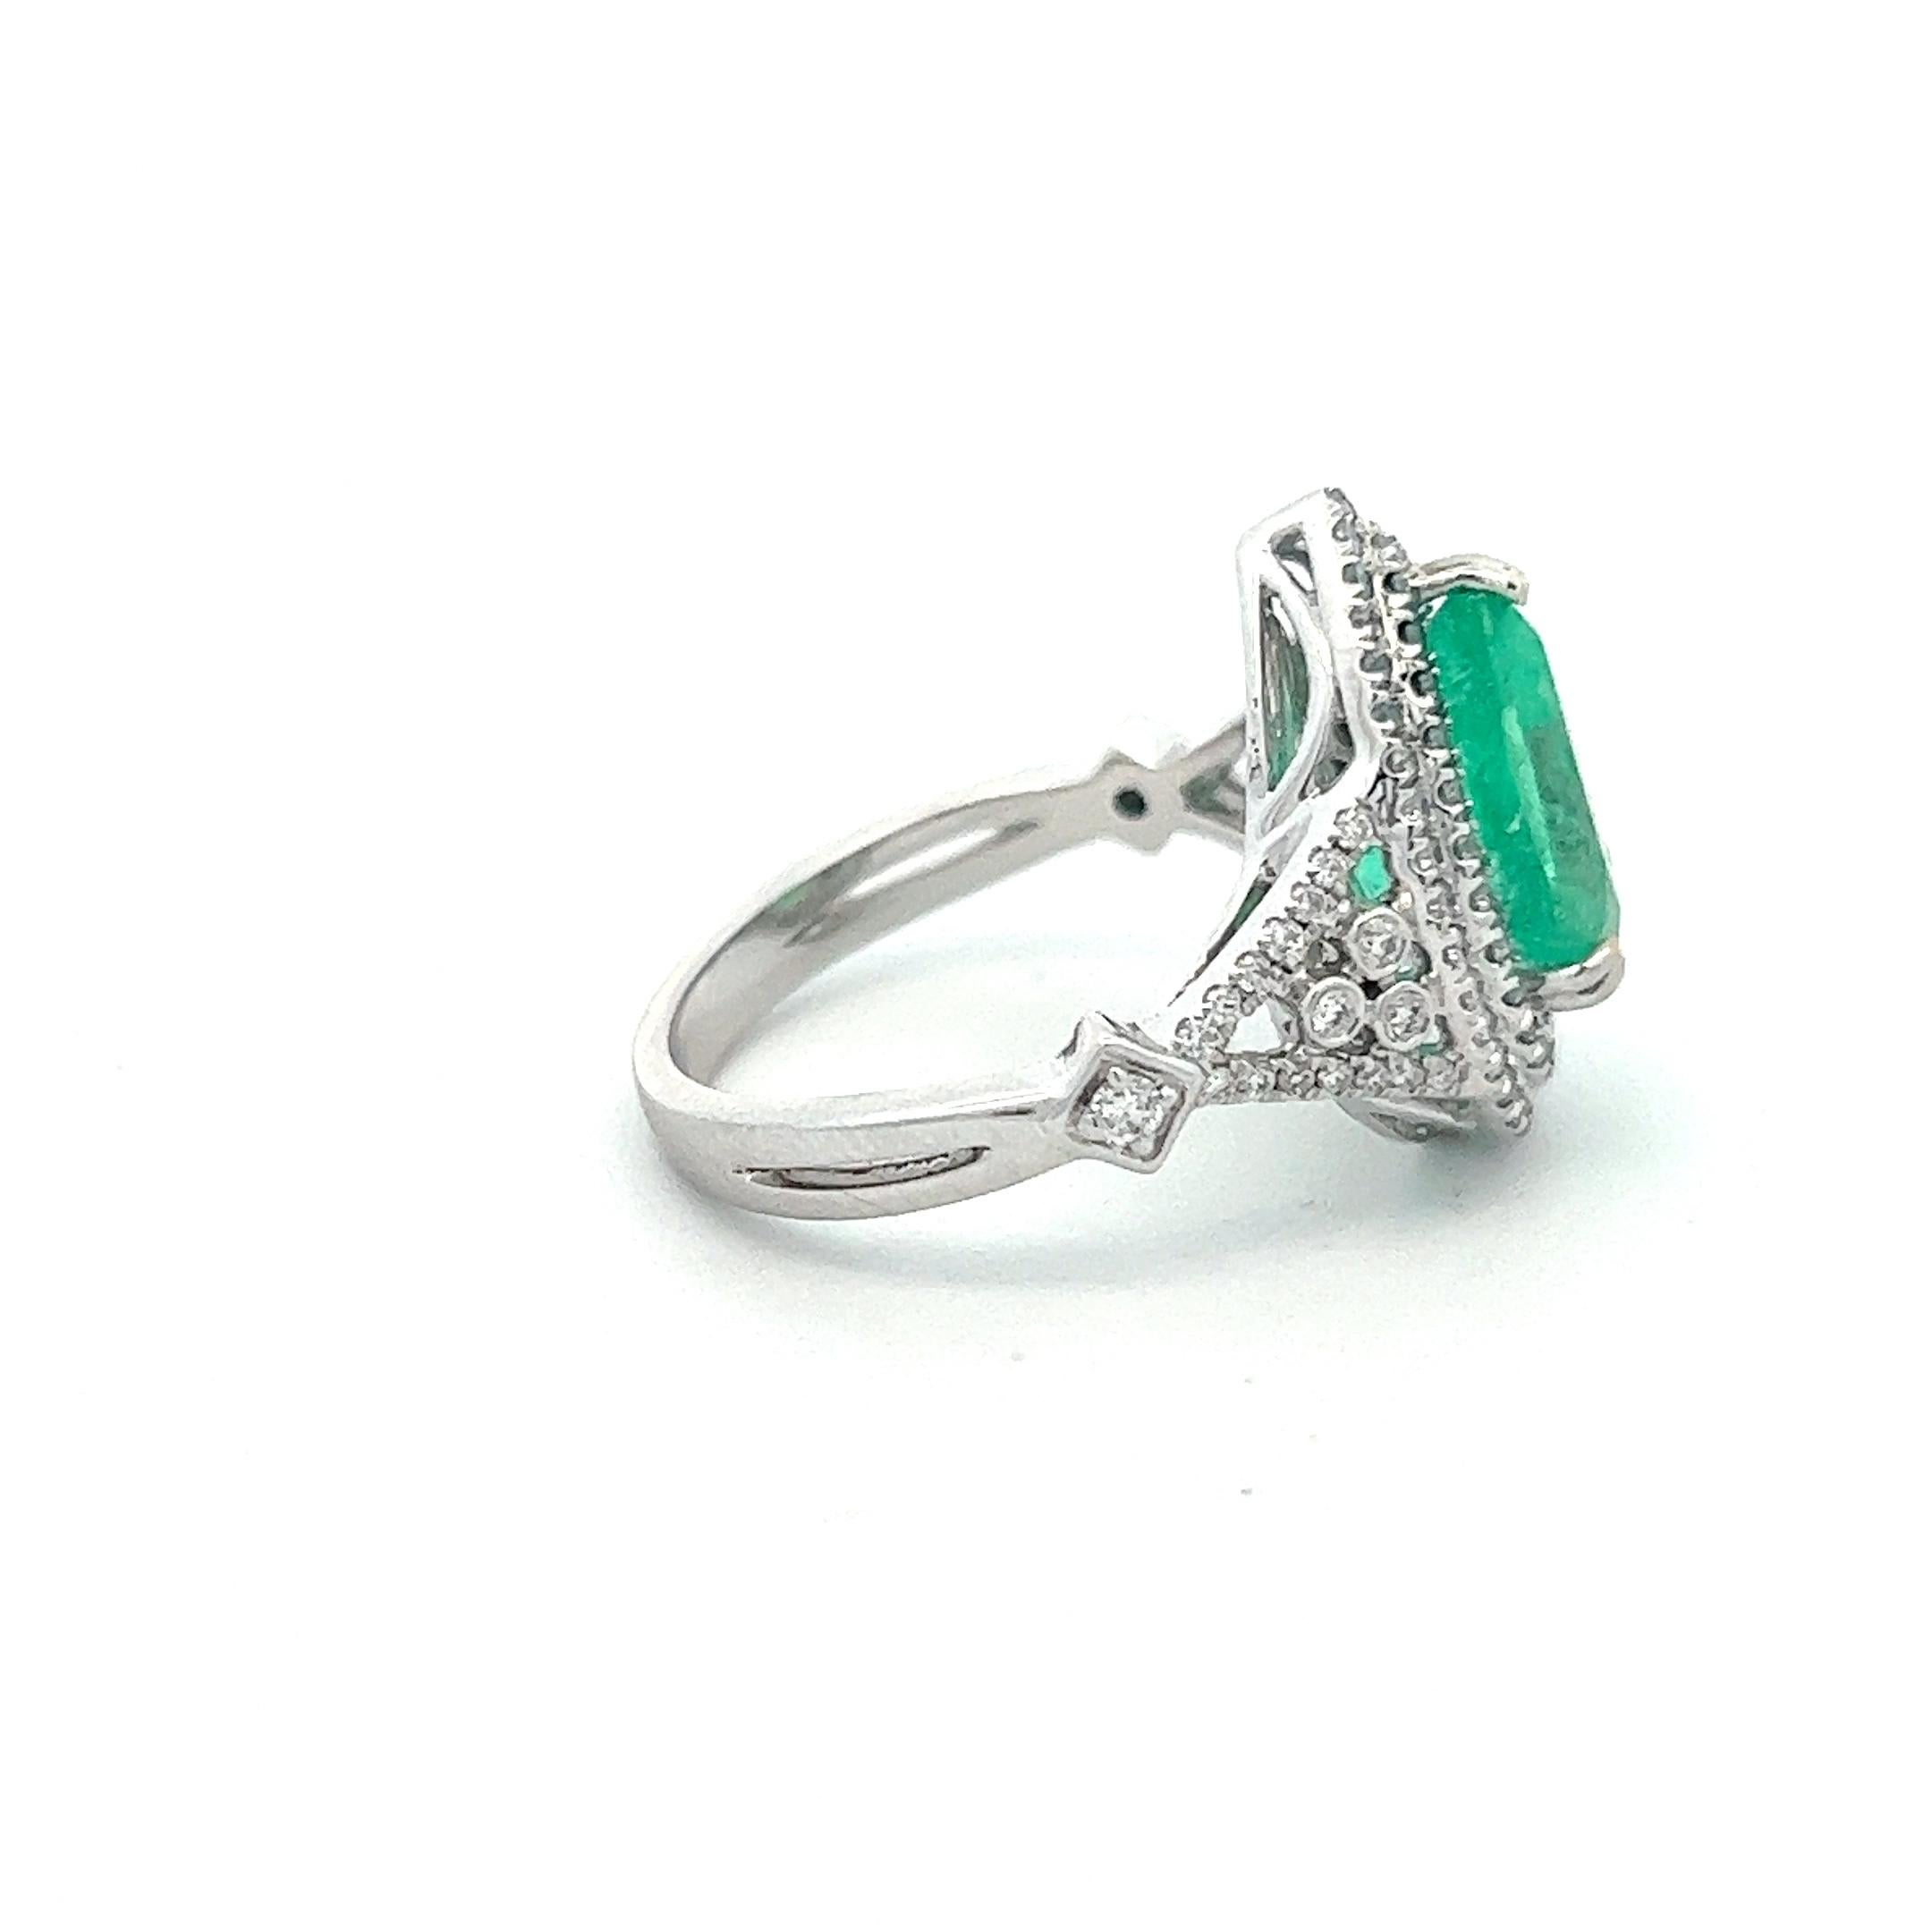 A striking presentation of an exceptional Colombian emerald within a double halo of diamonds in 14k white gold. The emerald, measured in setting, weighs approximately 2.88 carats, and has a few very minor chips and abrasions visible under